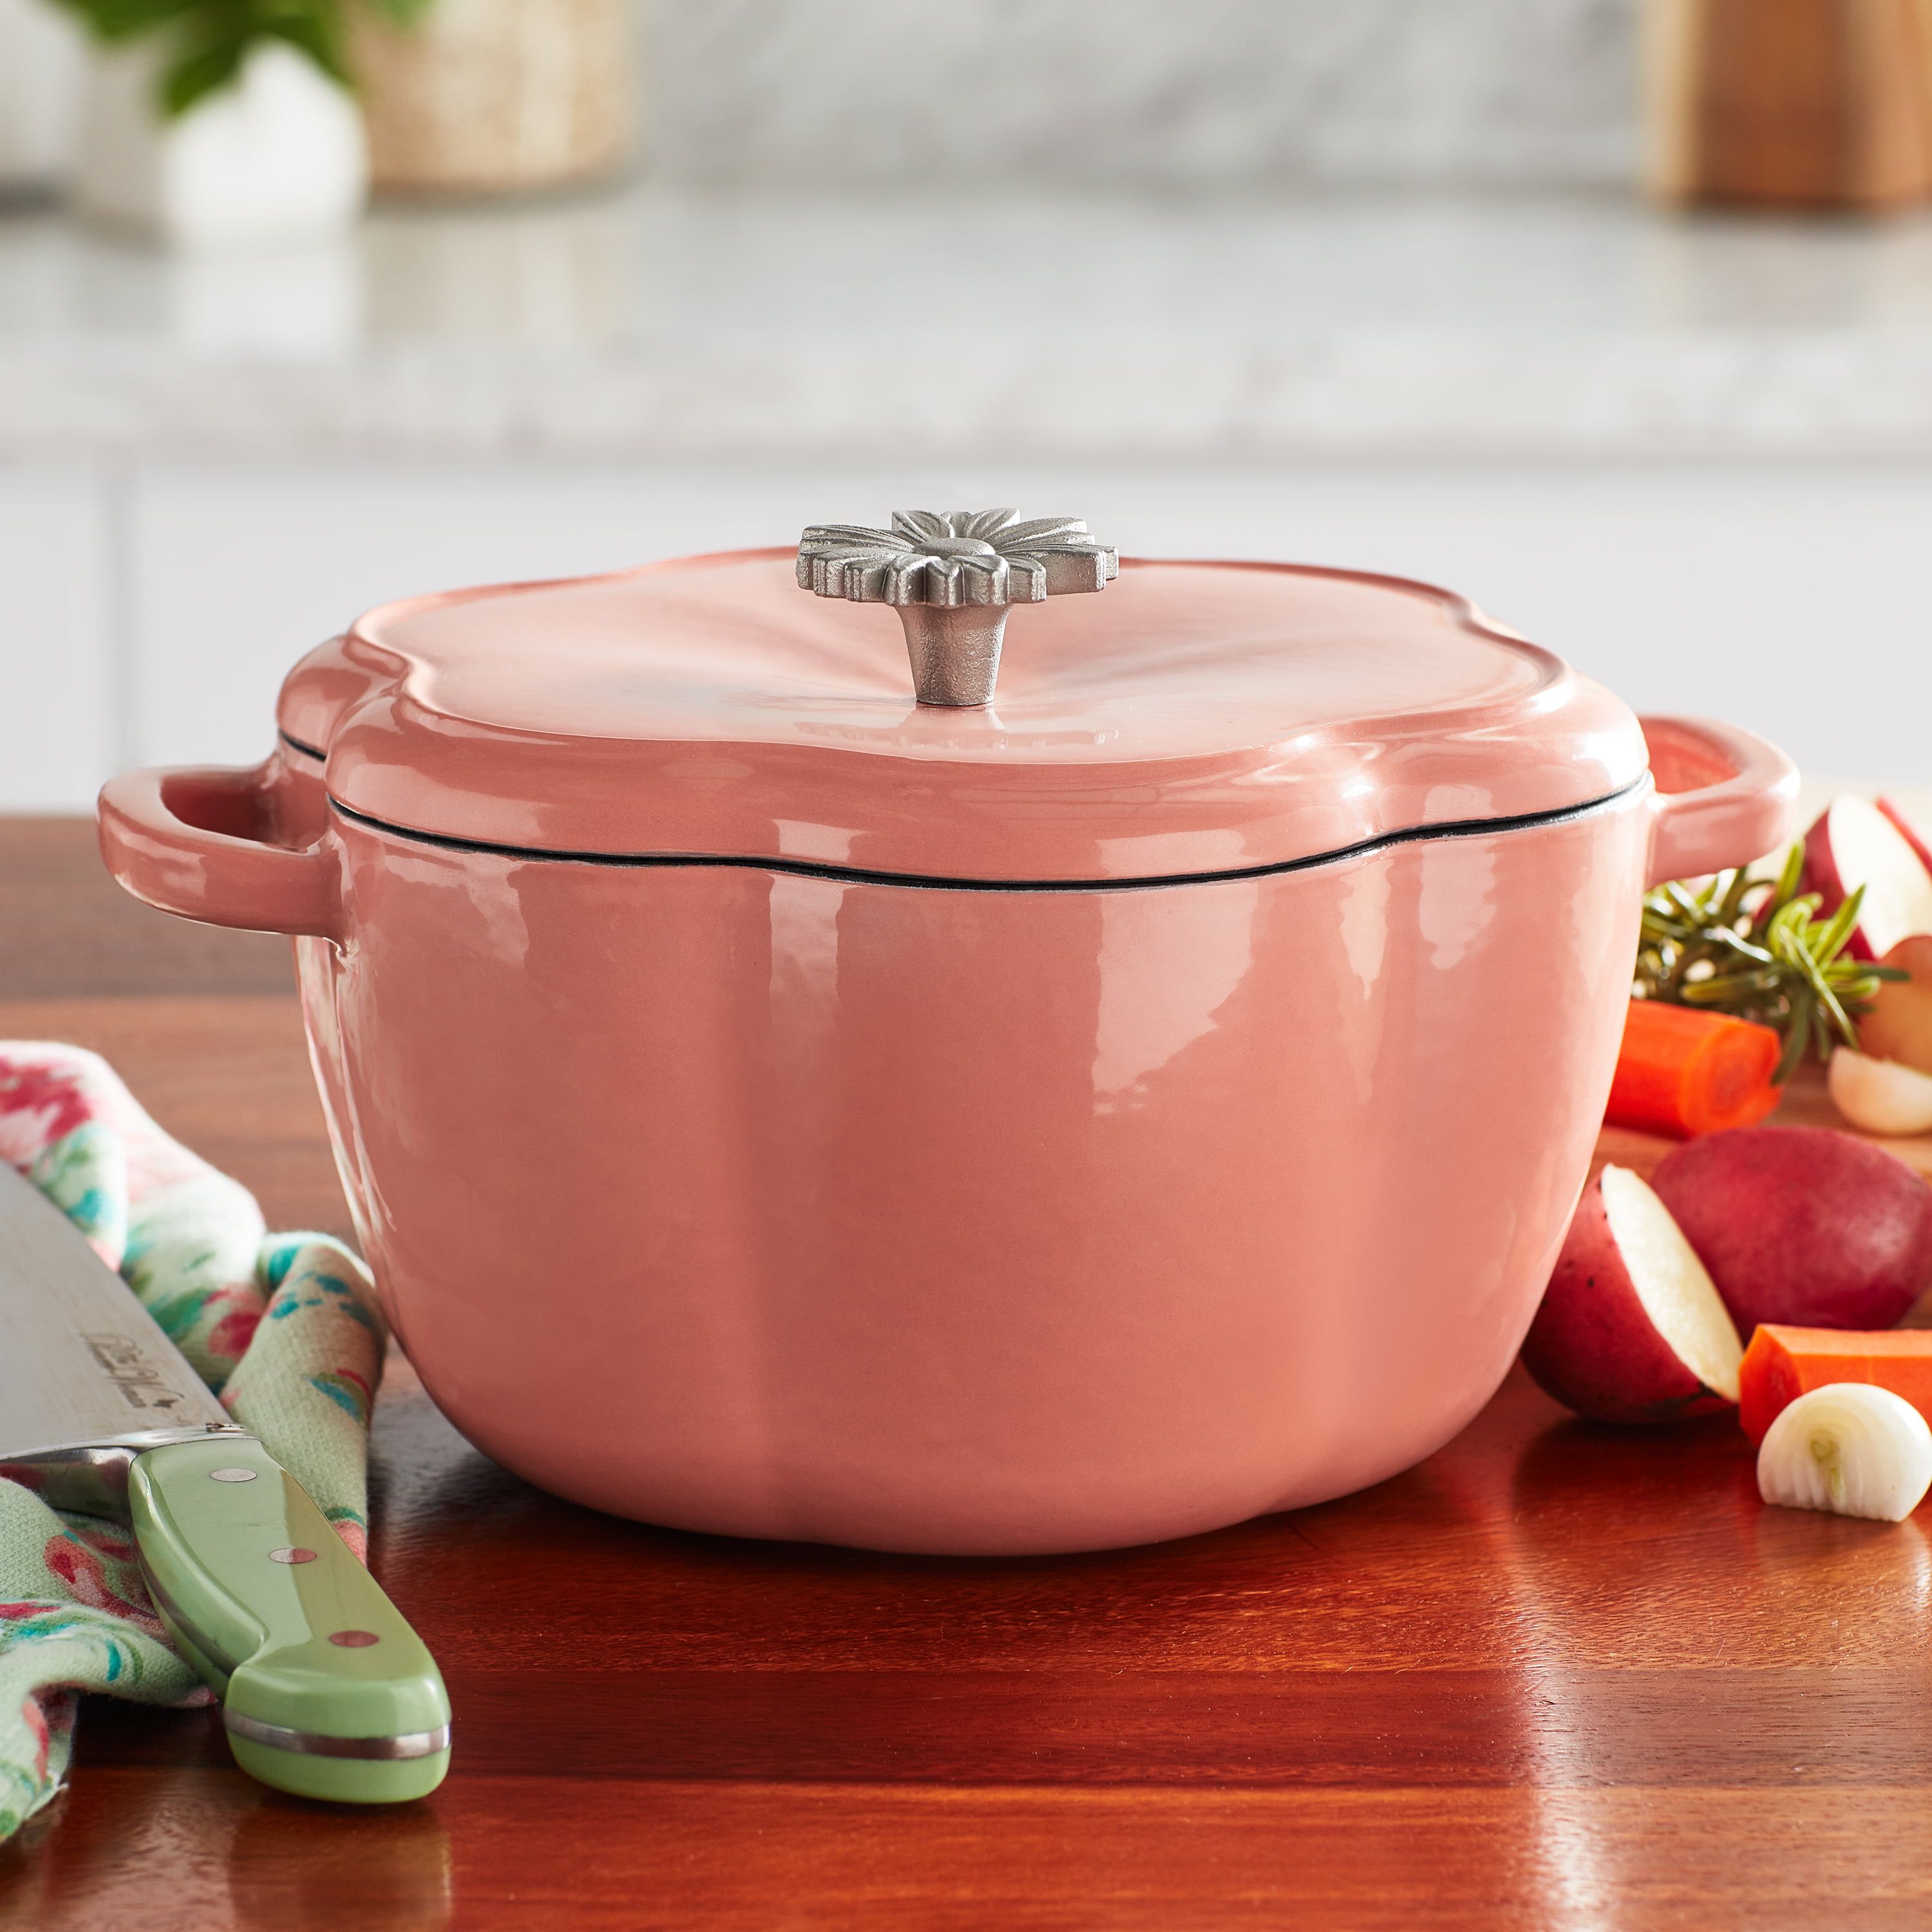 The Pioneer Woman Timeless Beauty 3-Quart Dutch Oven